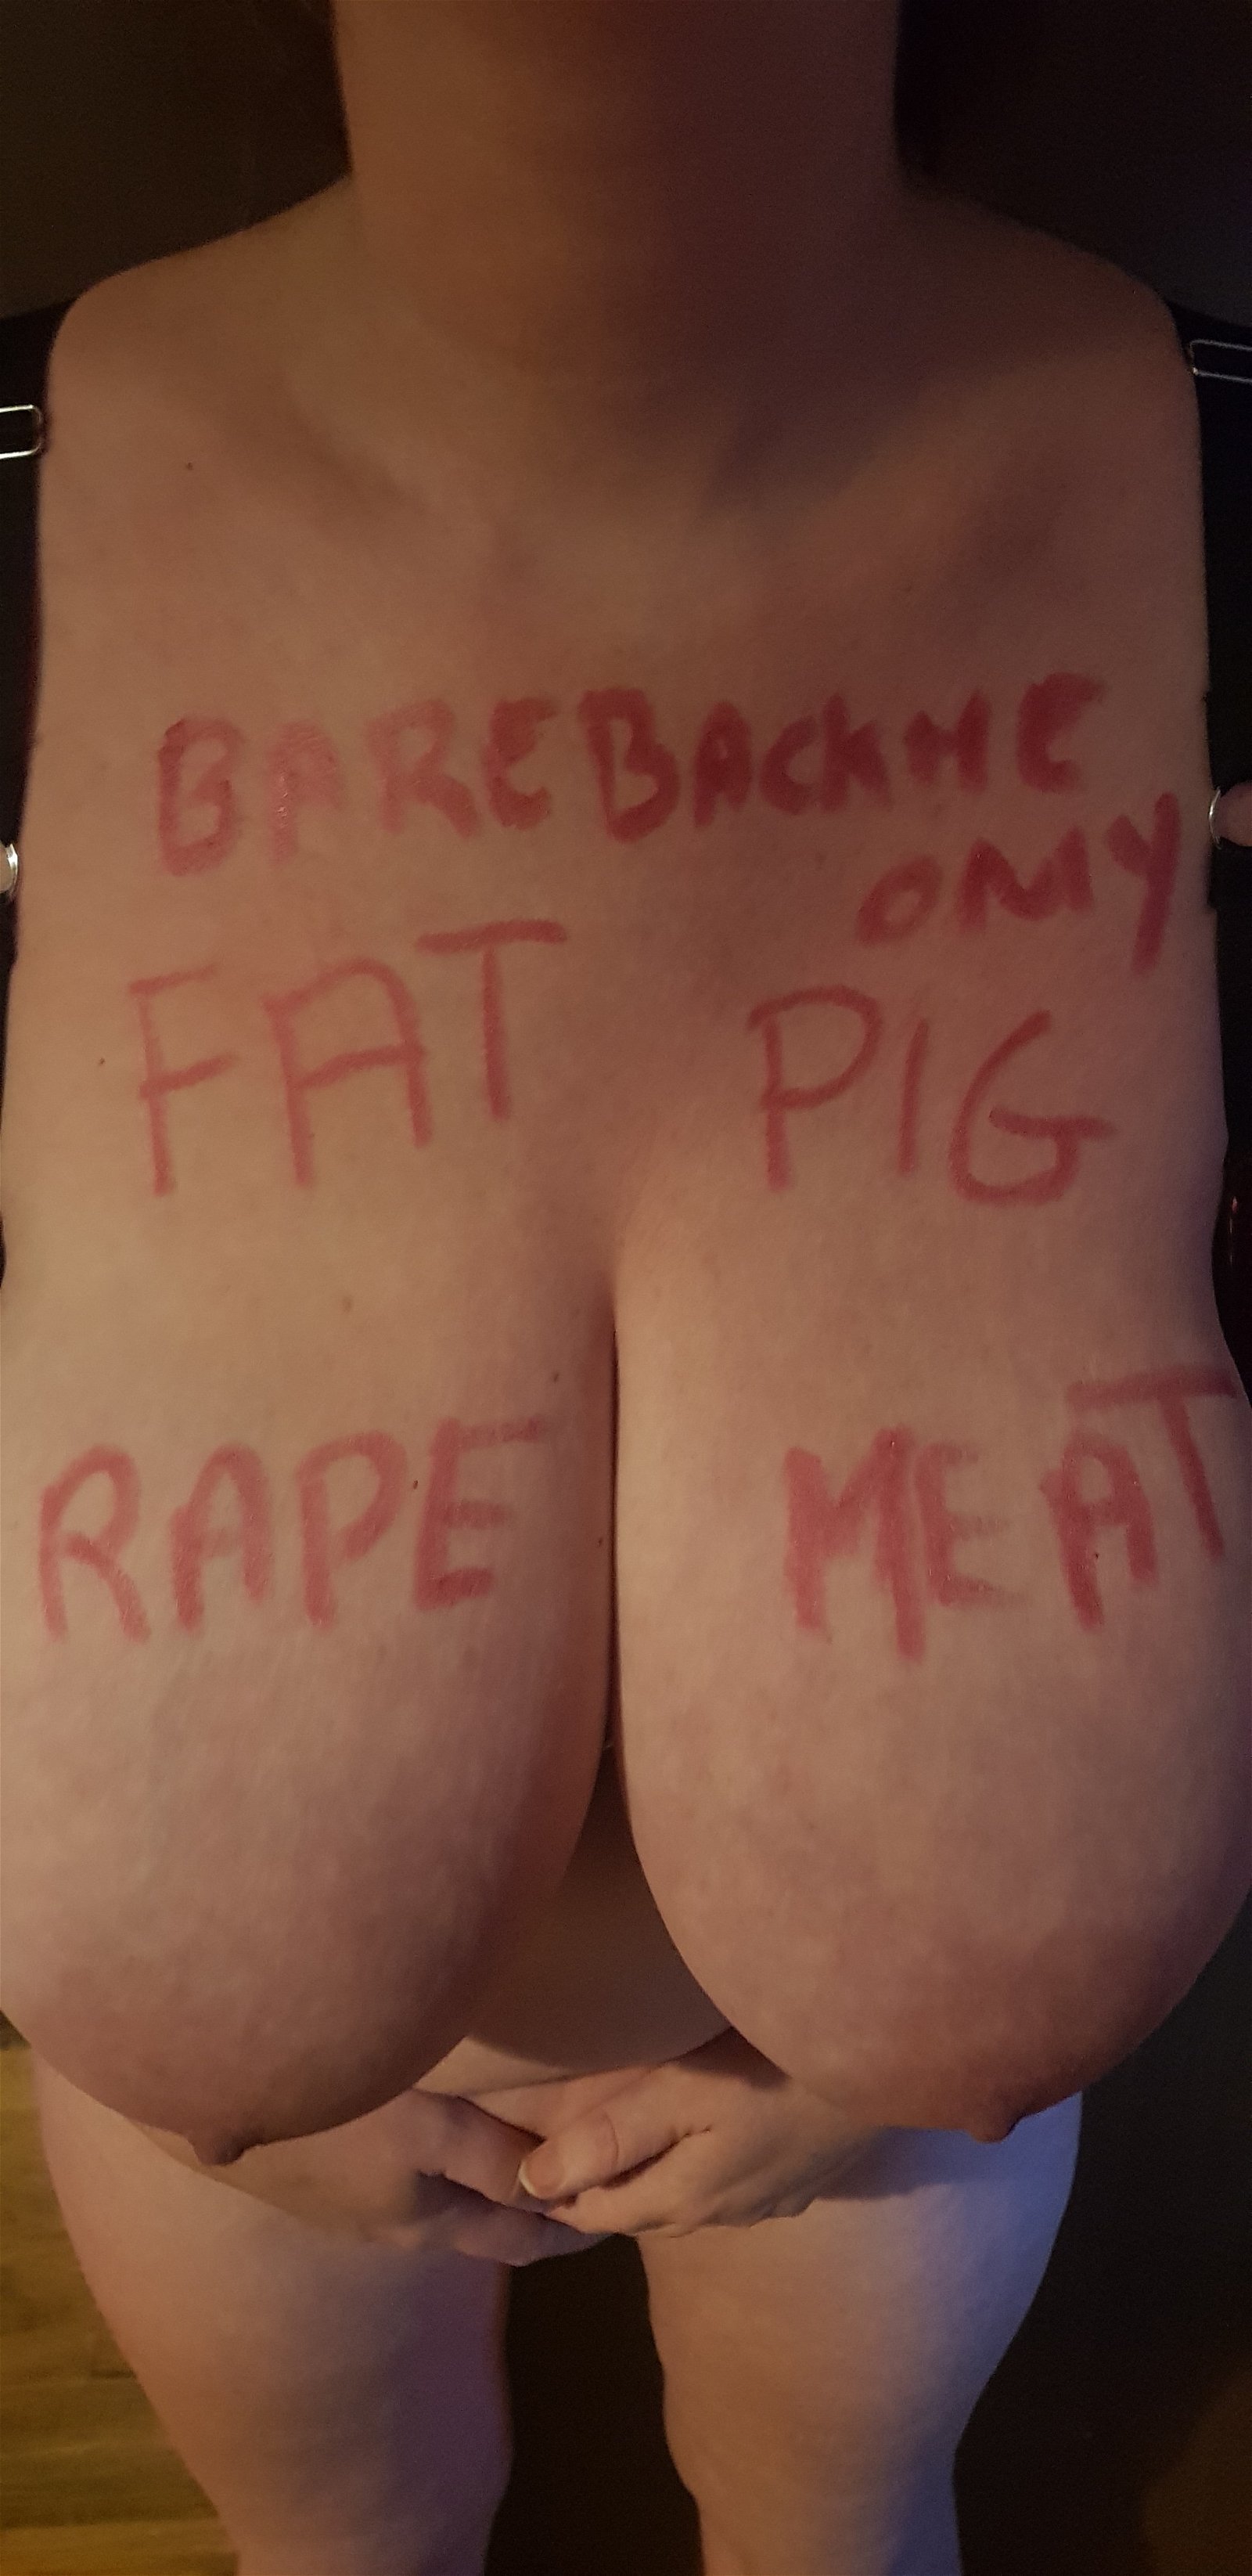 Photo by Daddiescumbucket with the username @Daddiescumbucket,  January 2, 2020 at 7:18 PM. The post is about the topic Rape Bait Academy and the text says 'mmmm let me know what you do to me'